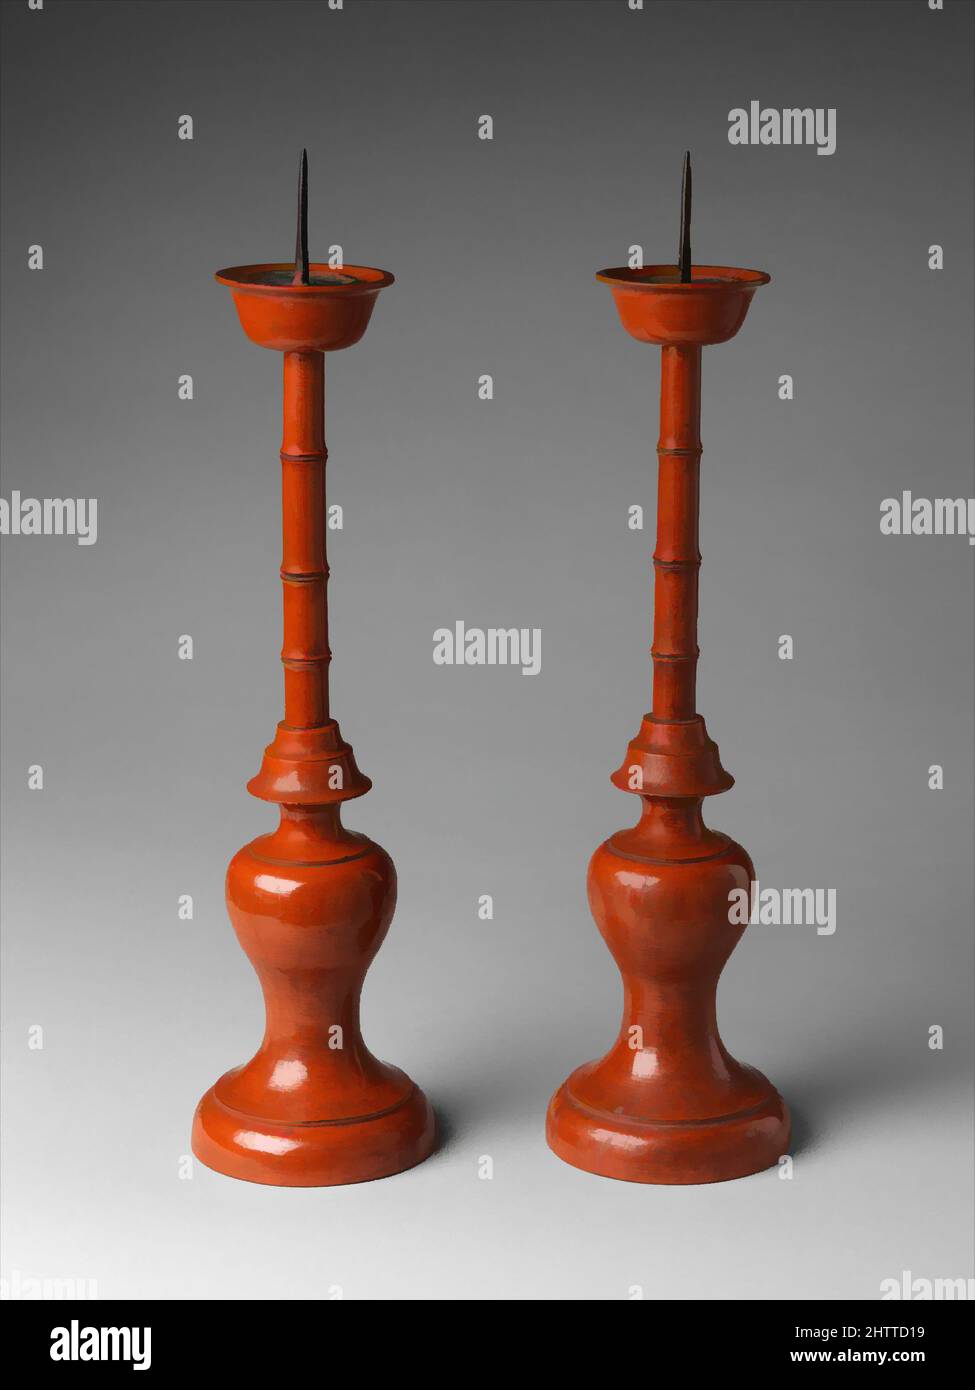 Art inspired by Pair of Candlesticks, Momoyama period (1573–1615), 16th century, Japan, Negoro ware, red lacquer, H.16 1/2 in. (41.9 cm), Lacquer, Classic works modernized by Artotop with a splash of modernity. Shapes, color and value, eye-catching visual impact on art. Emotions through freedom of artworks in a contemporary way. A timeless message pursuing a wildly creative new direction. Artists turning to the digital medium and creating the Artotop NFT Stock Photo